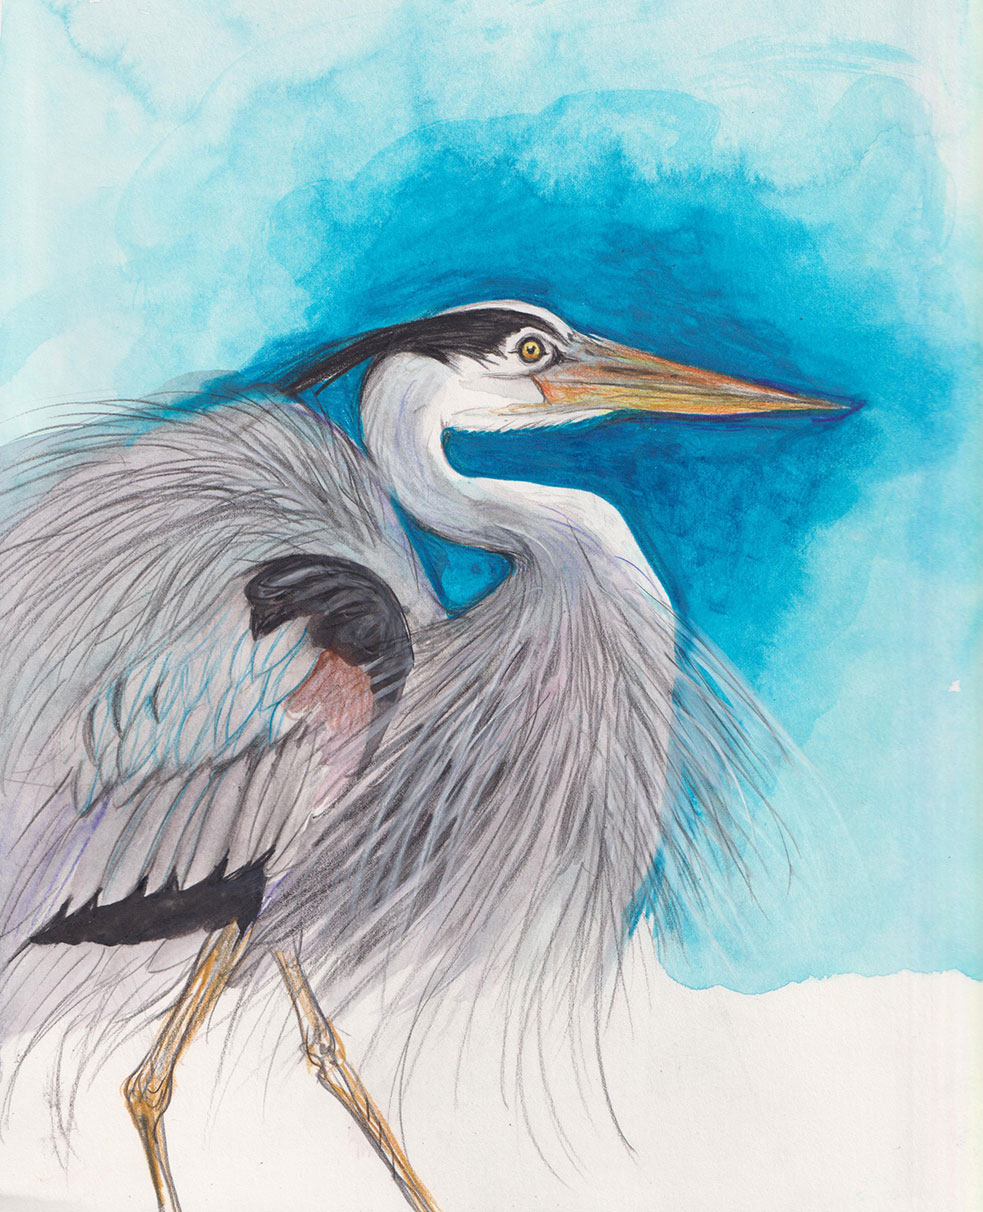 A watercolour illustration of a blue heron features a bright blue background and a full-body depiction of an elegant great blue heron standing, facing the right of the frame.